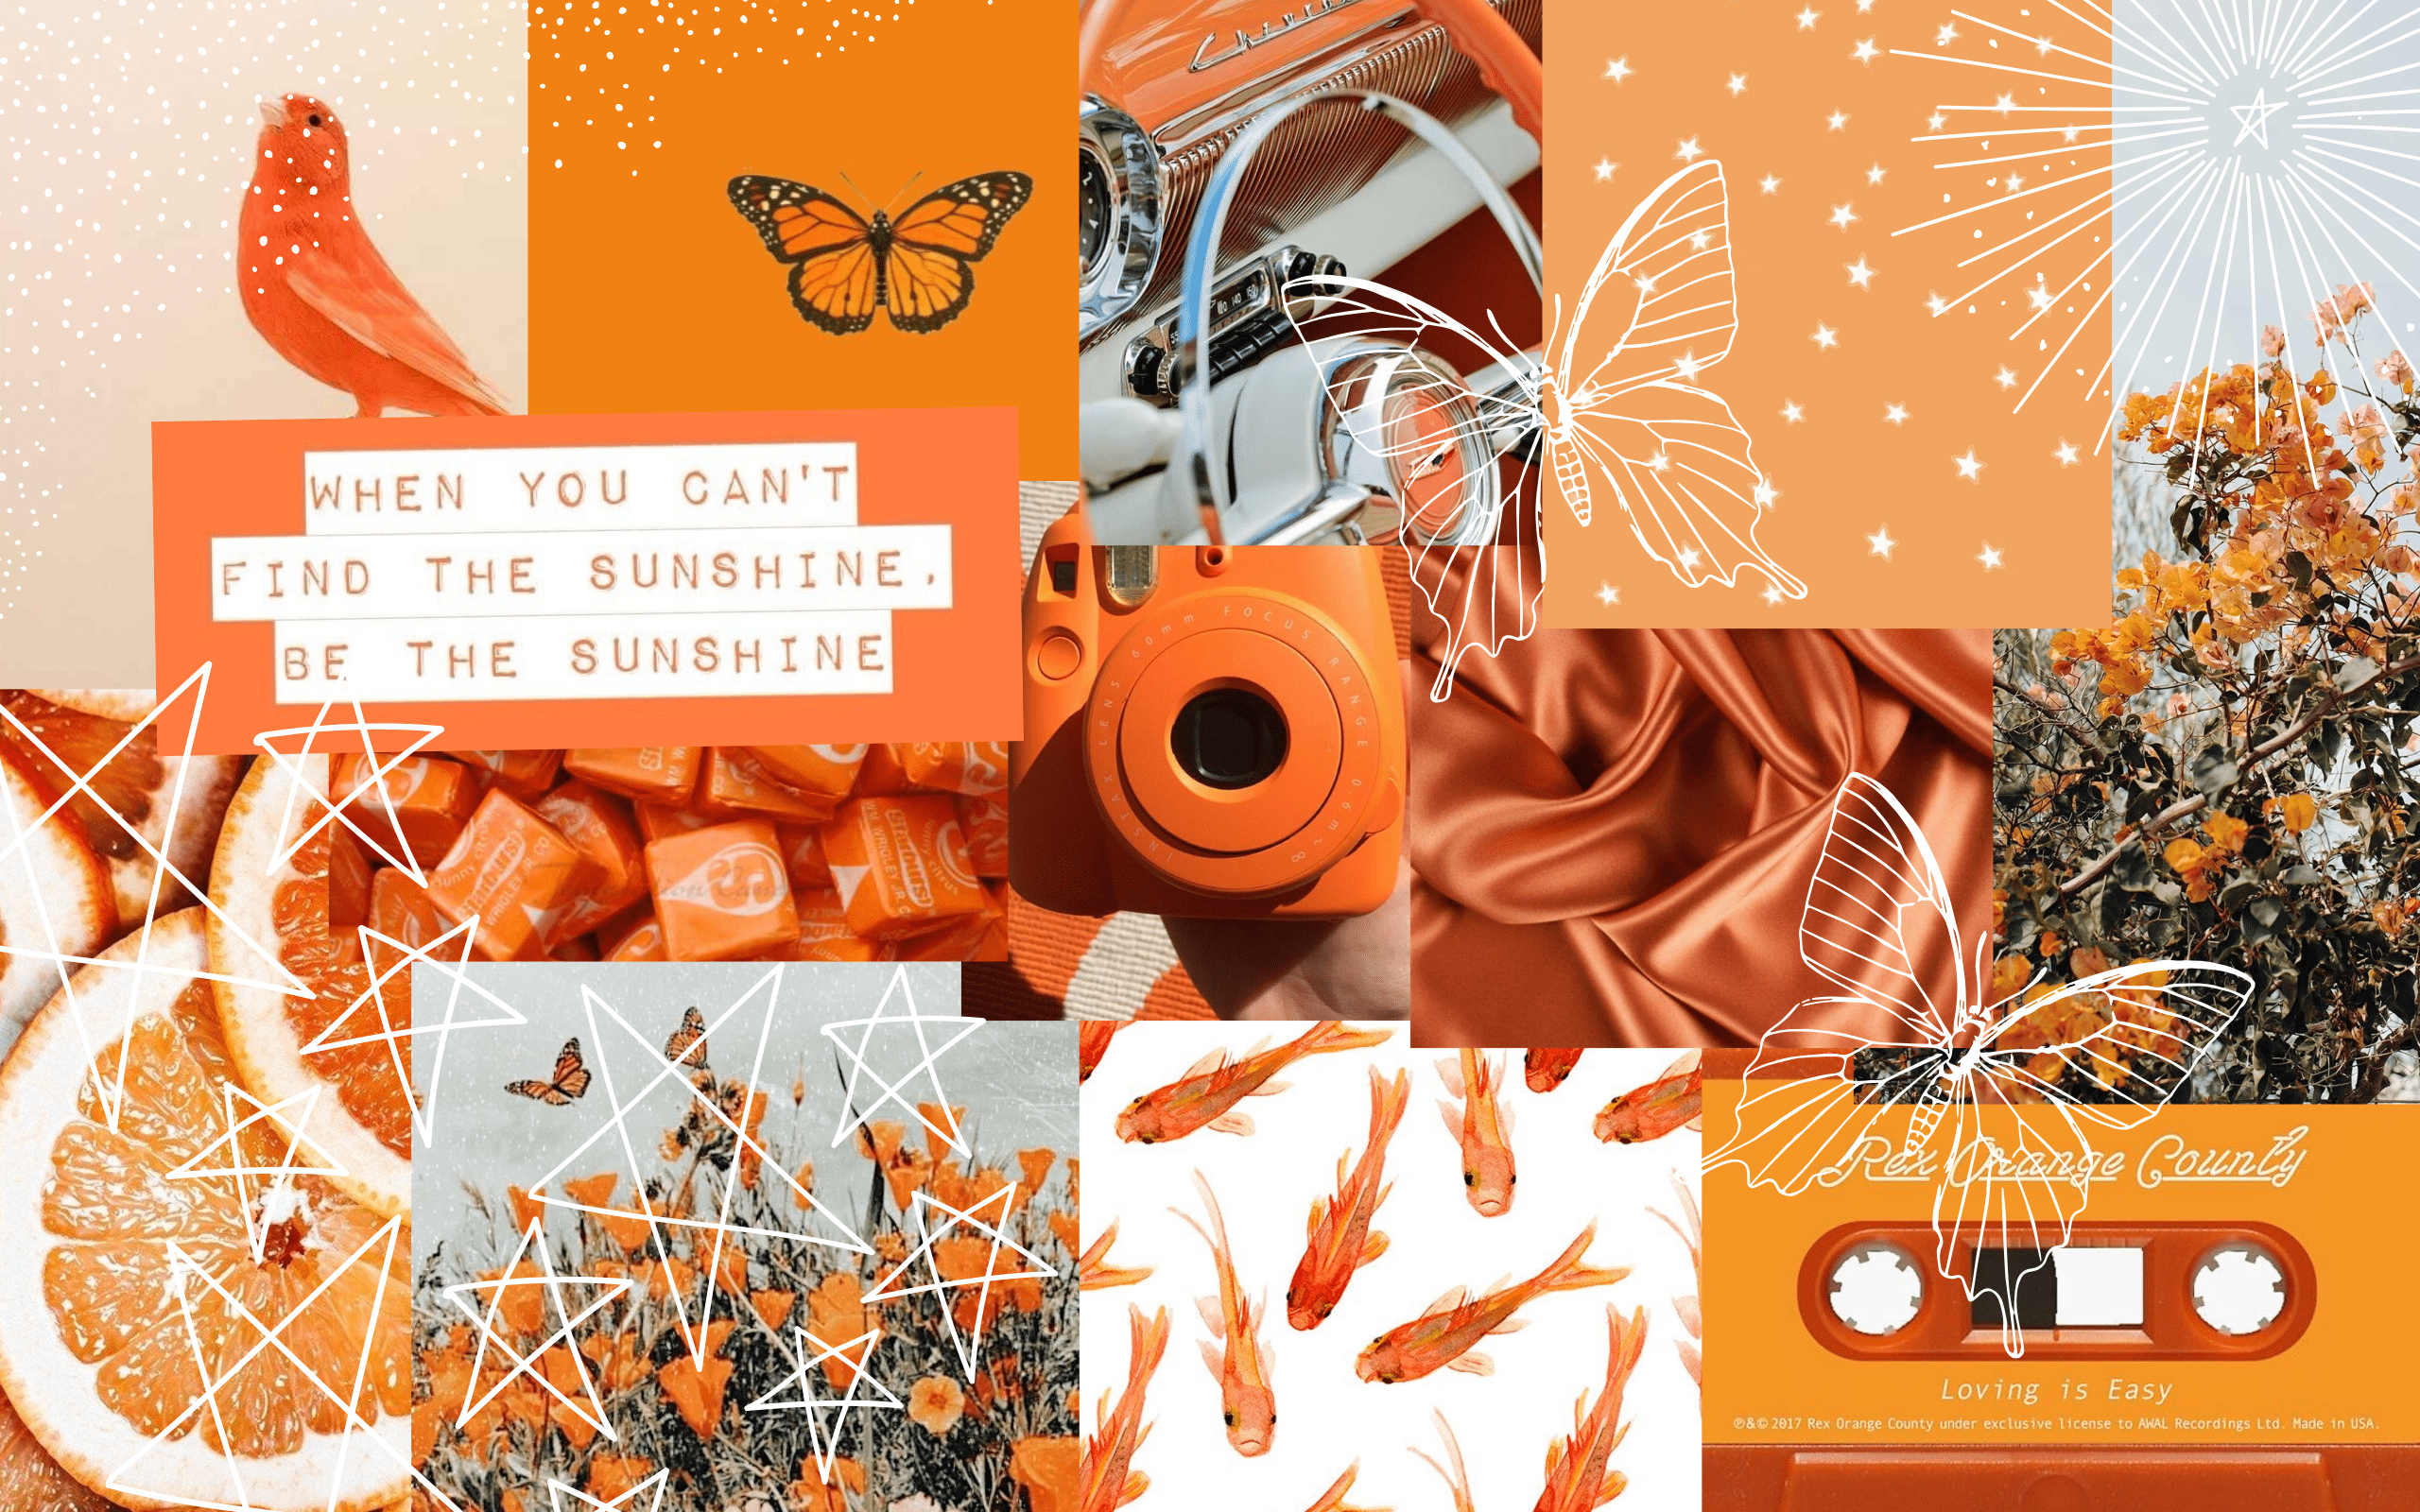 A collage of orange and white images including butterflies, fruit, and a camera. - Orange